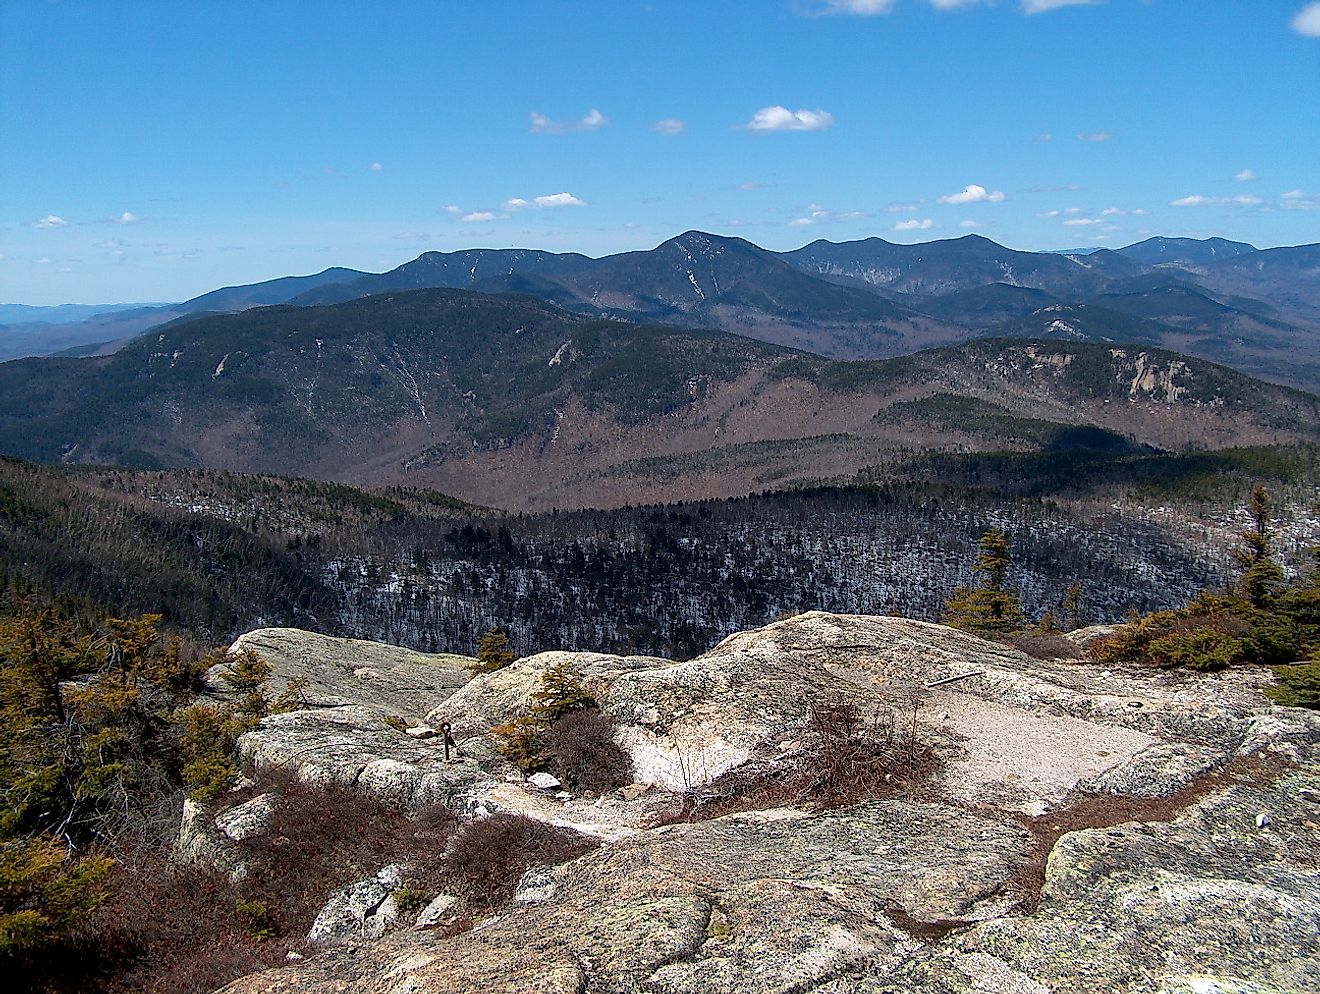 The Sandwich Range in the White Mountains (New Hampshire). Ken Gallager at en.wikipedia/Public domain